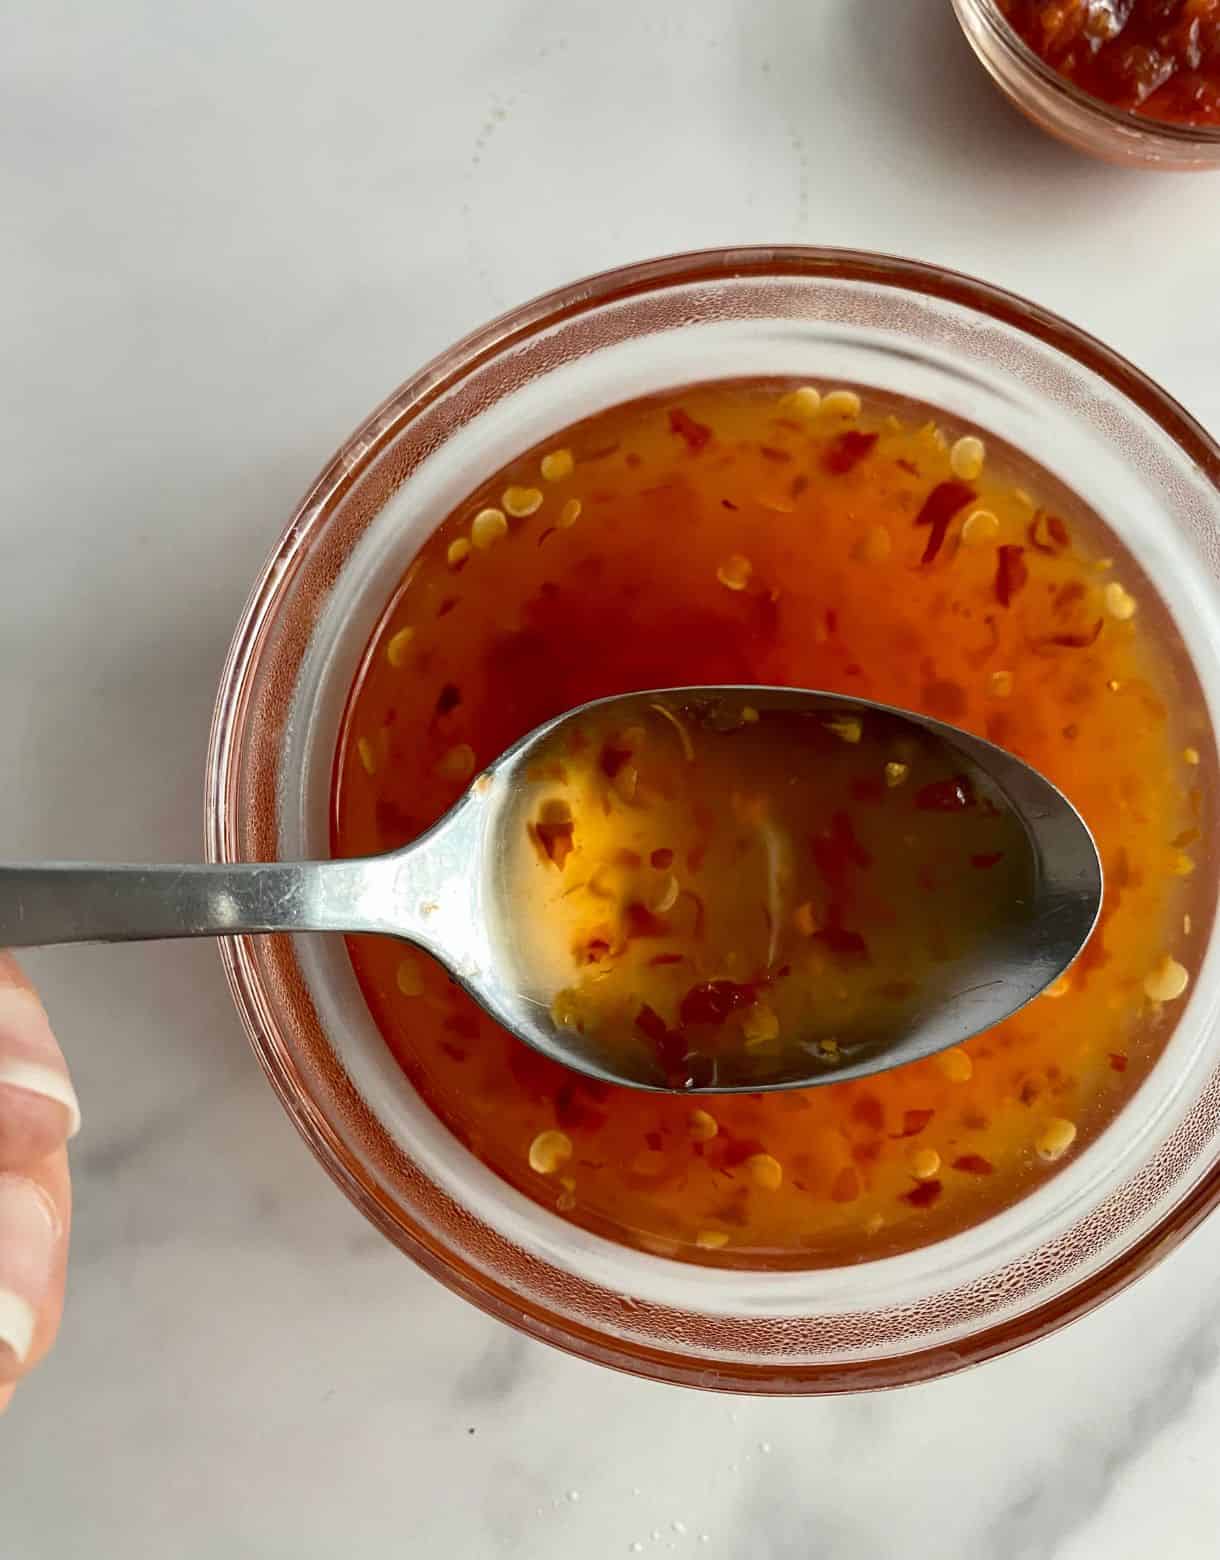 A bowl of Sweet Chili Sauce with a spoon.